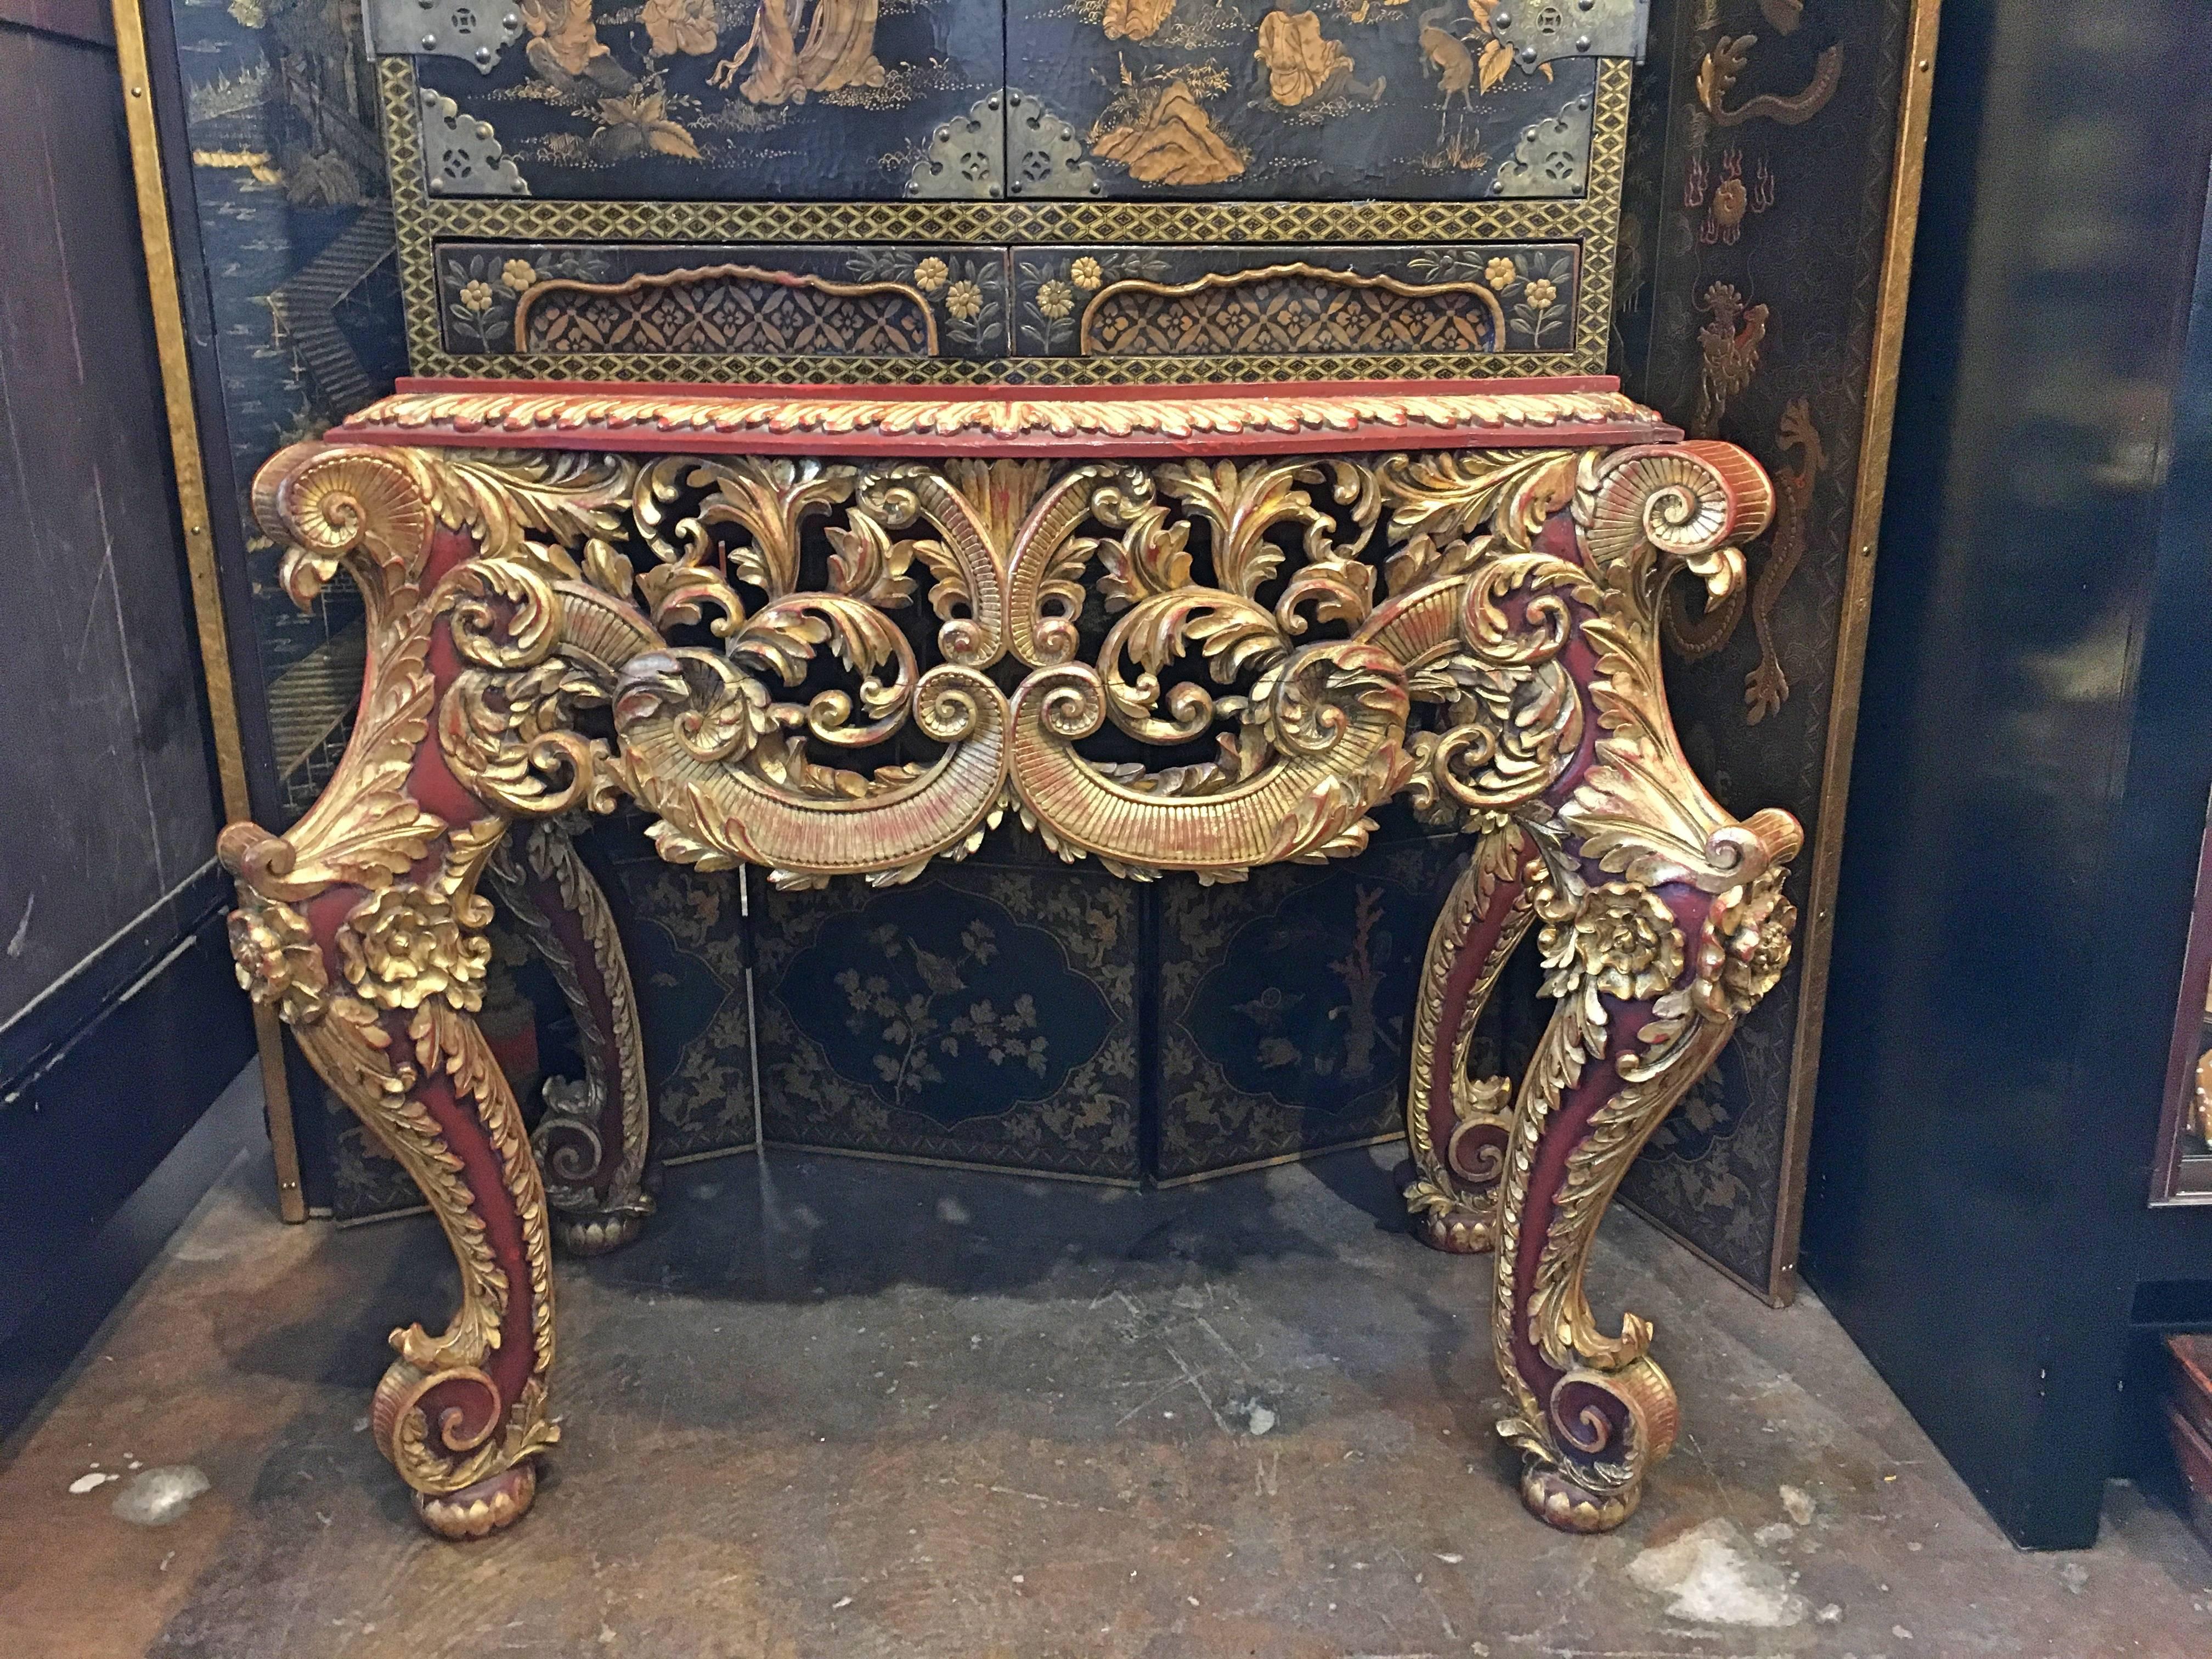 Wood Japonisme Black Lacquer and Gilt Decorated Cabinet on Carved Gilt Stand